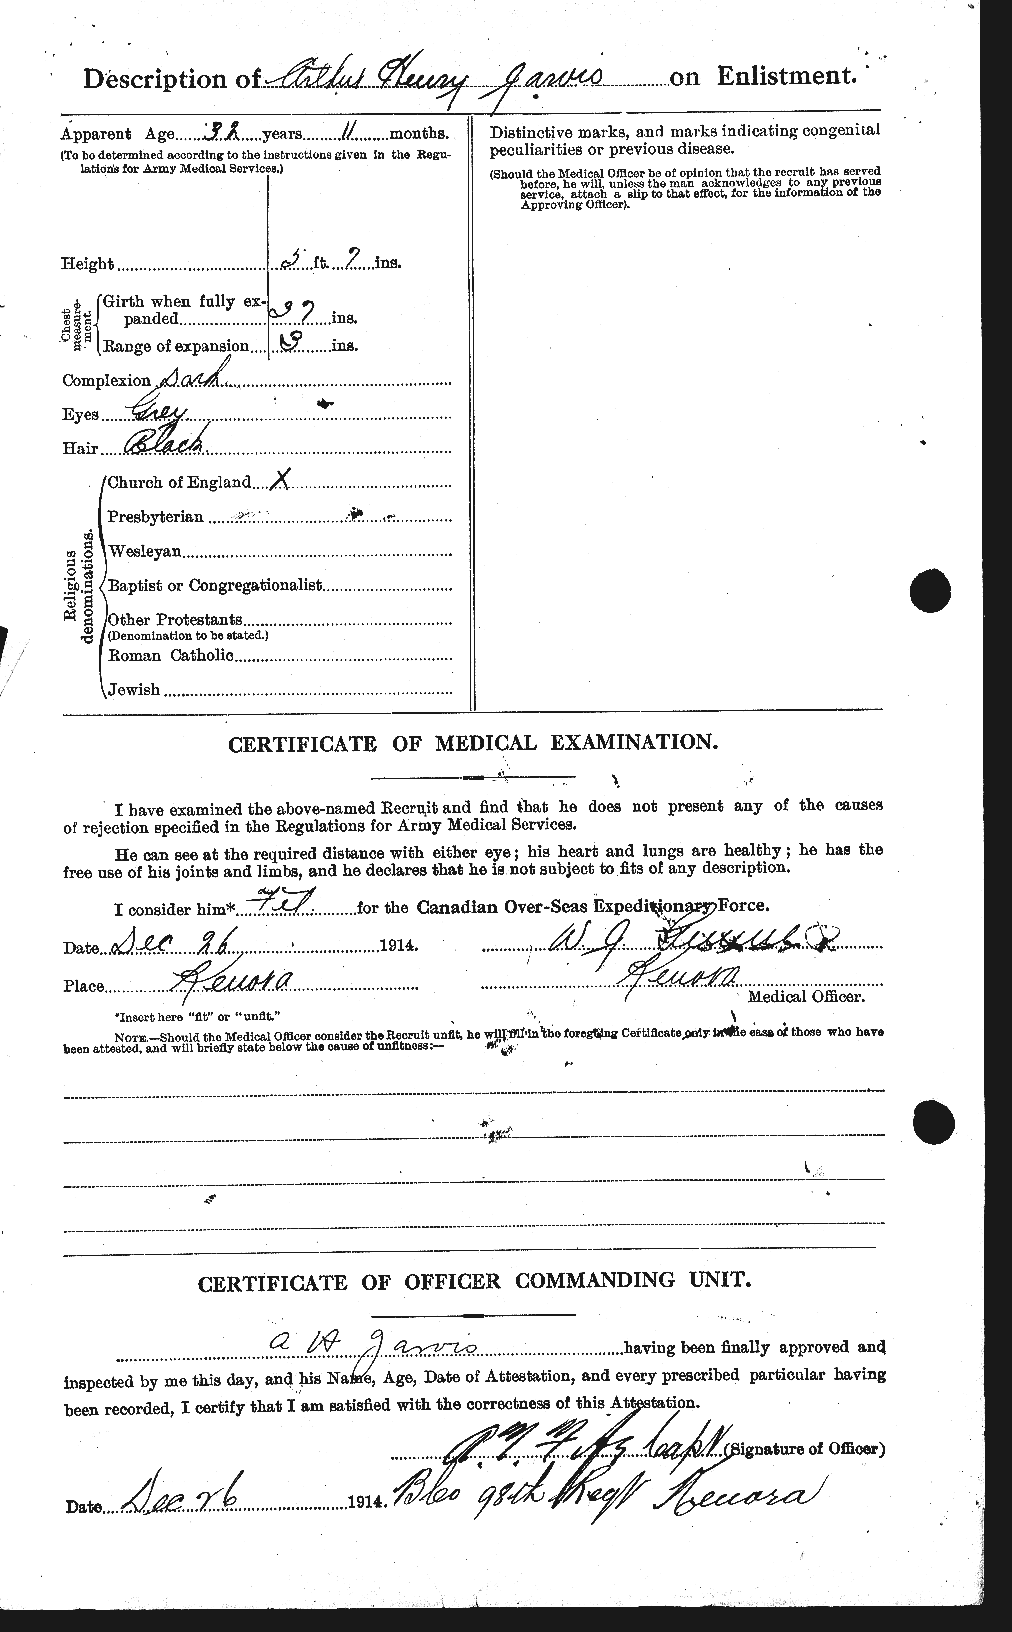 Personnel Records of the First World War - CEF 414642b